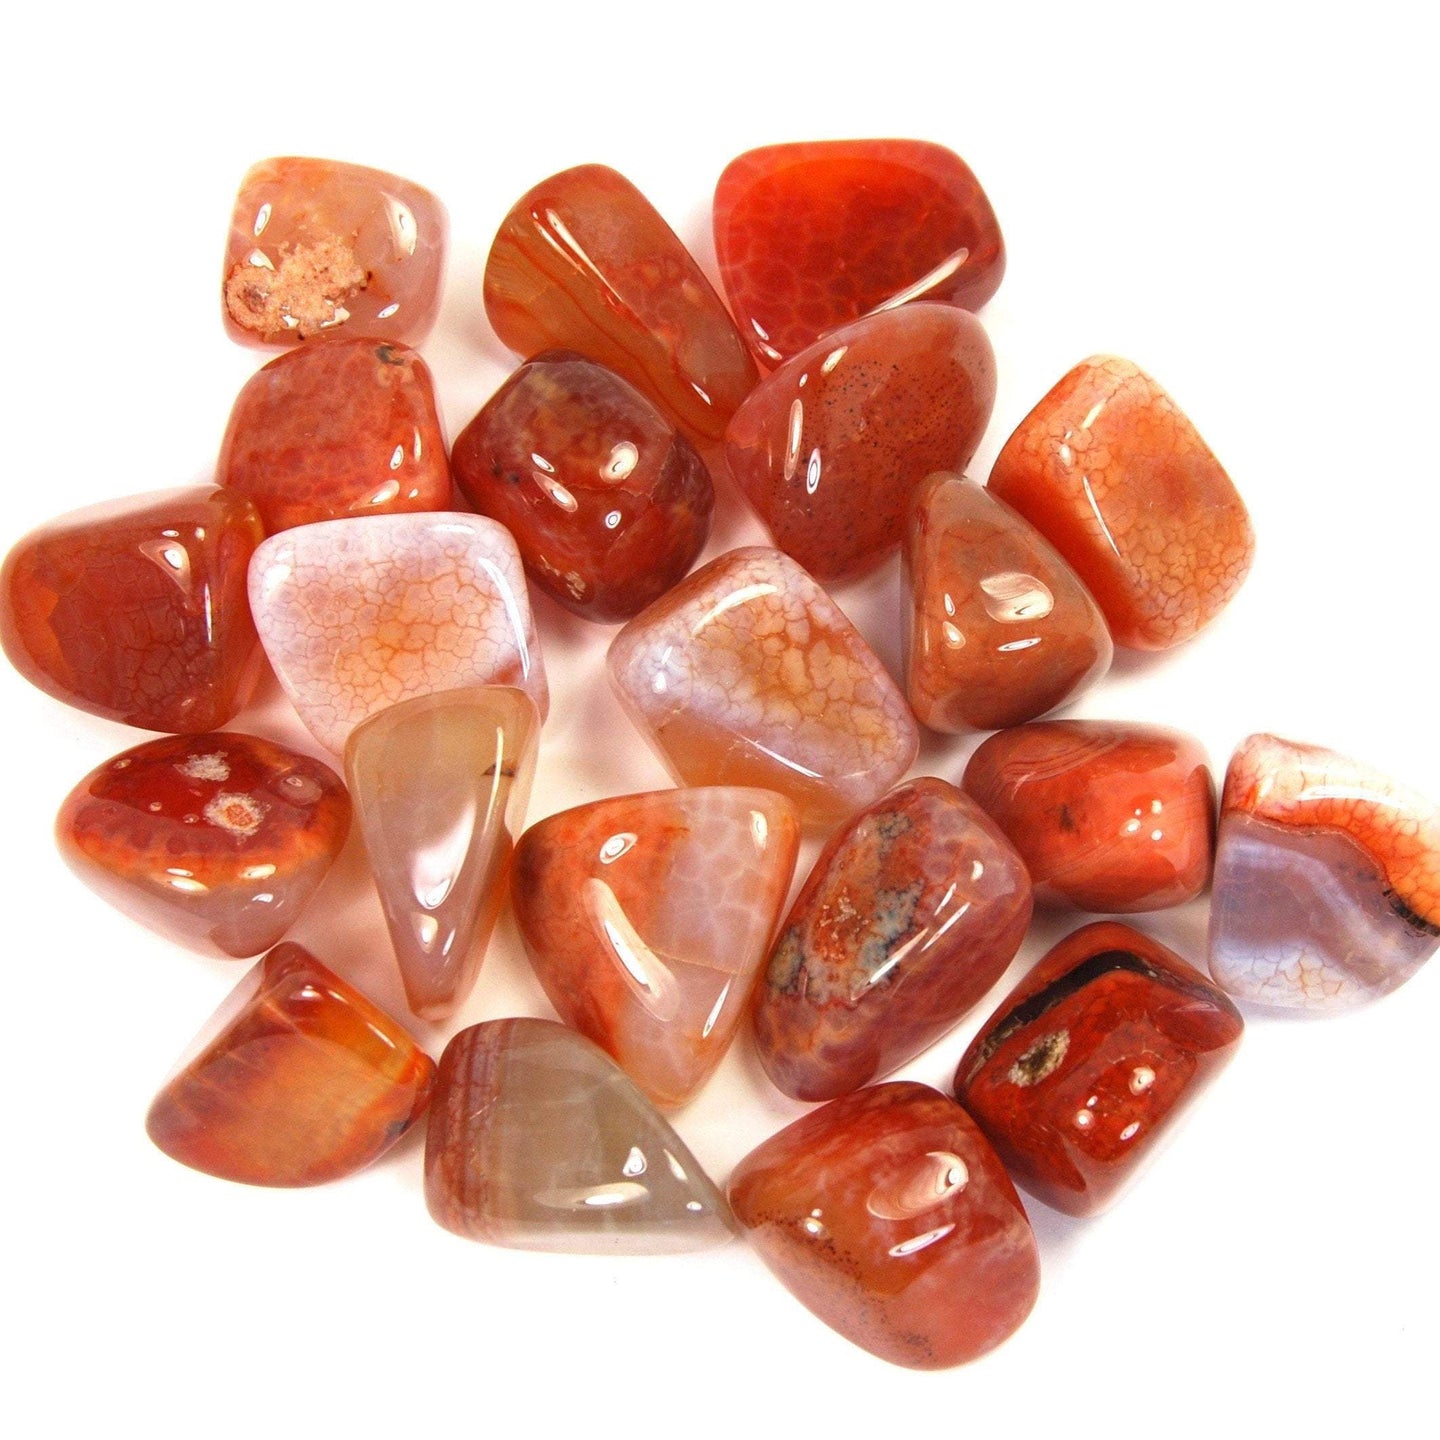 Mexican Fire Agate Tumbled Stones